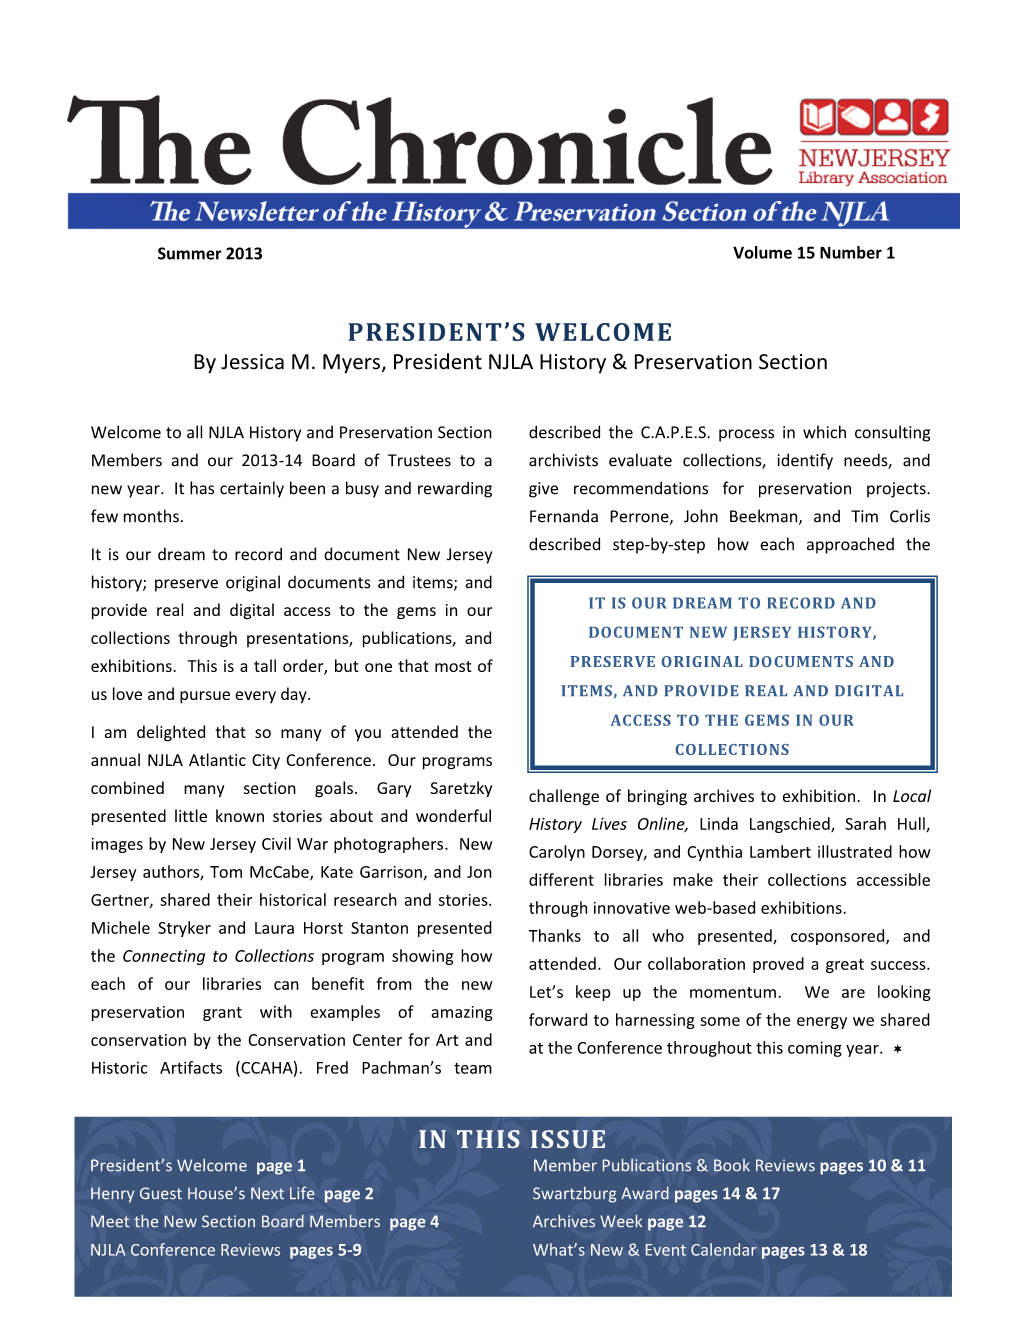 President's Welcome in This Issue